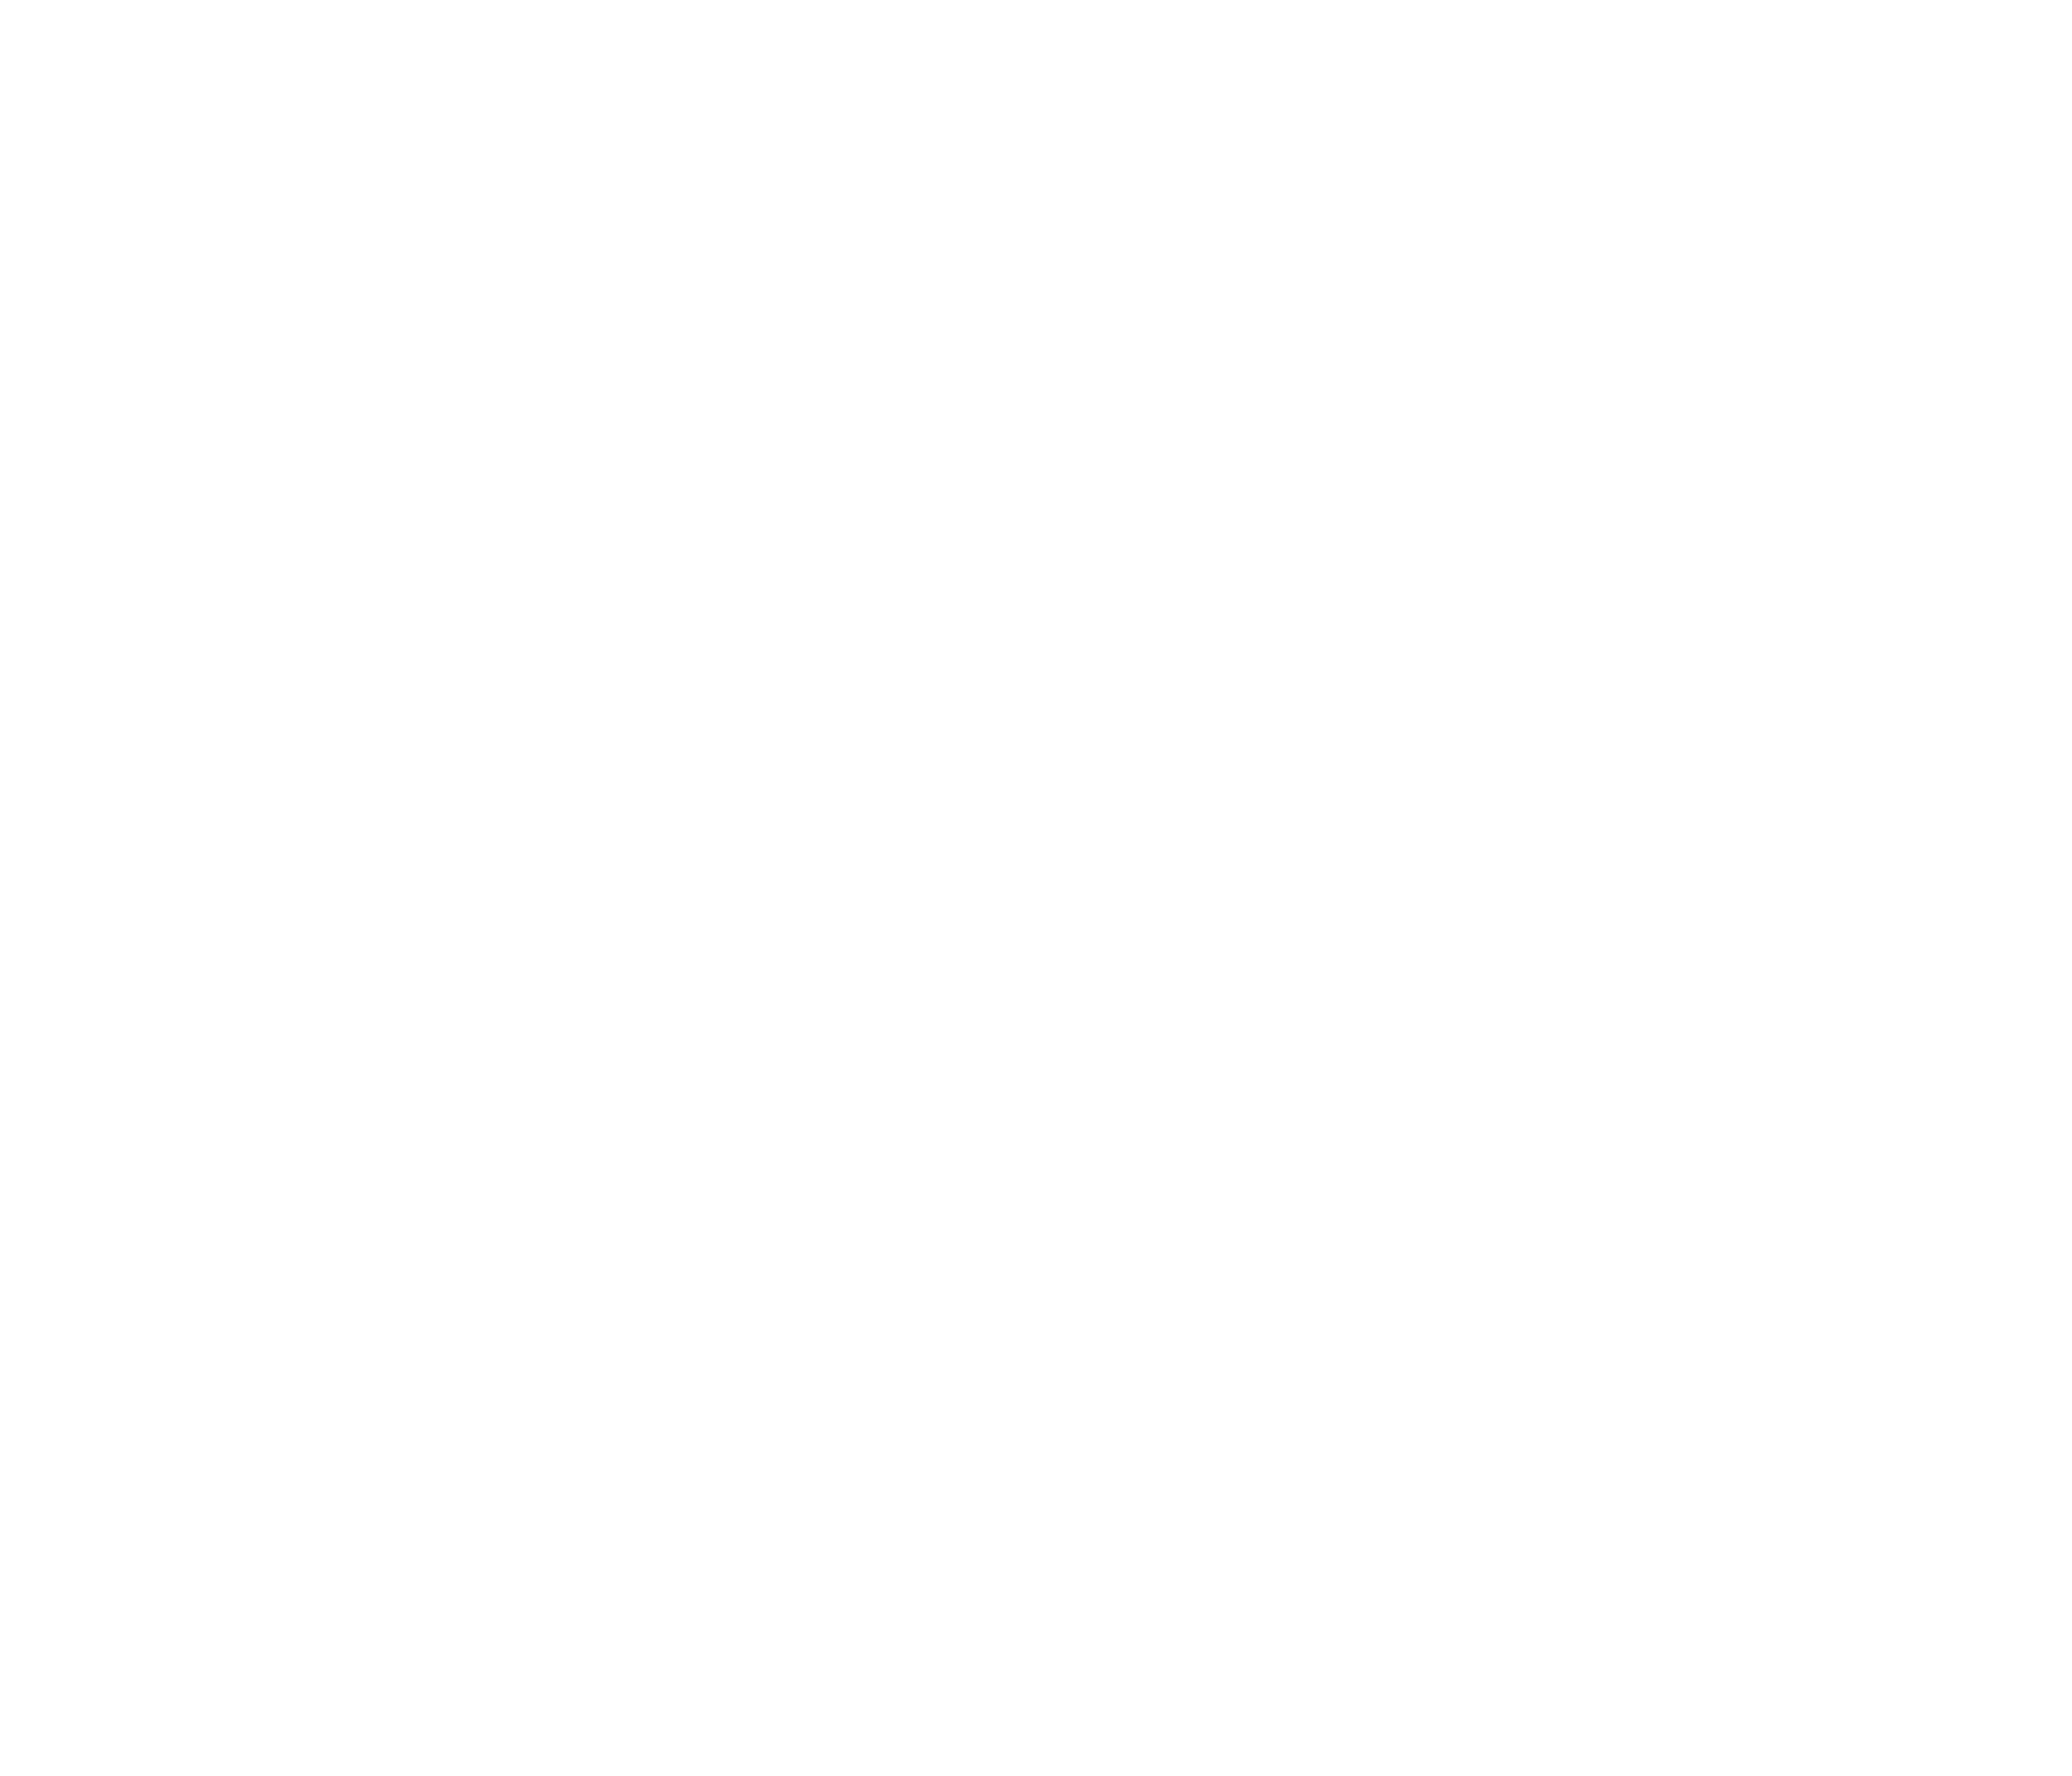 Seaport Realty Group